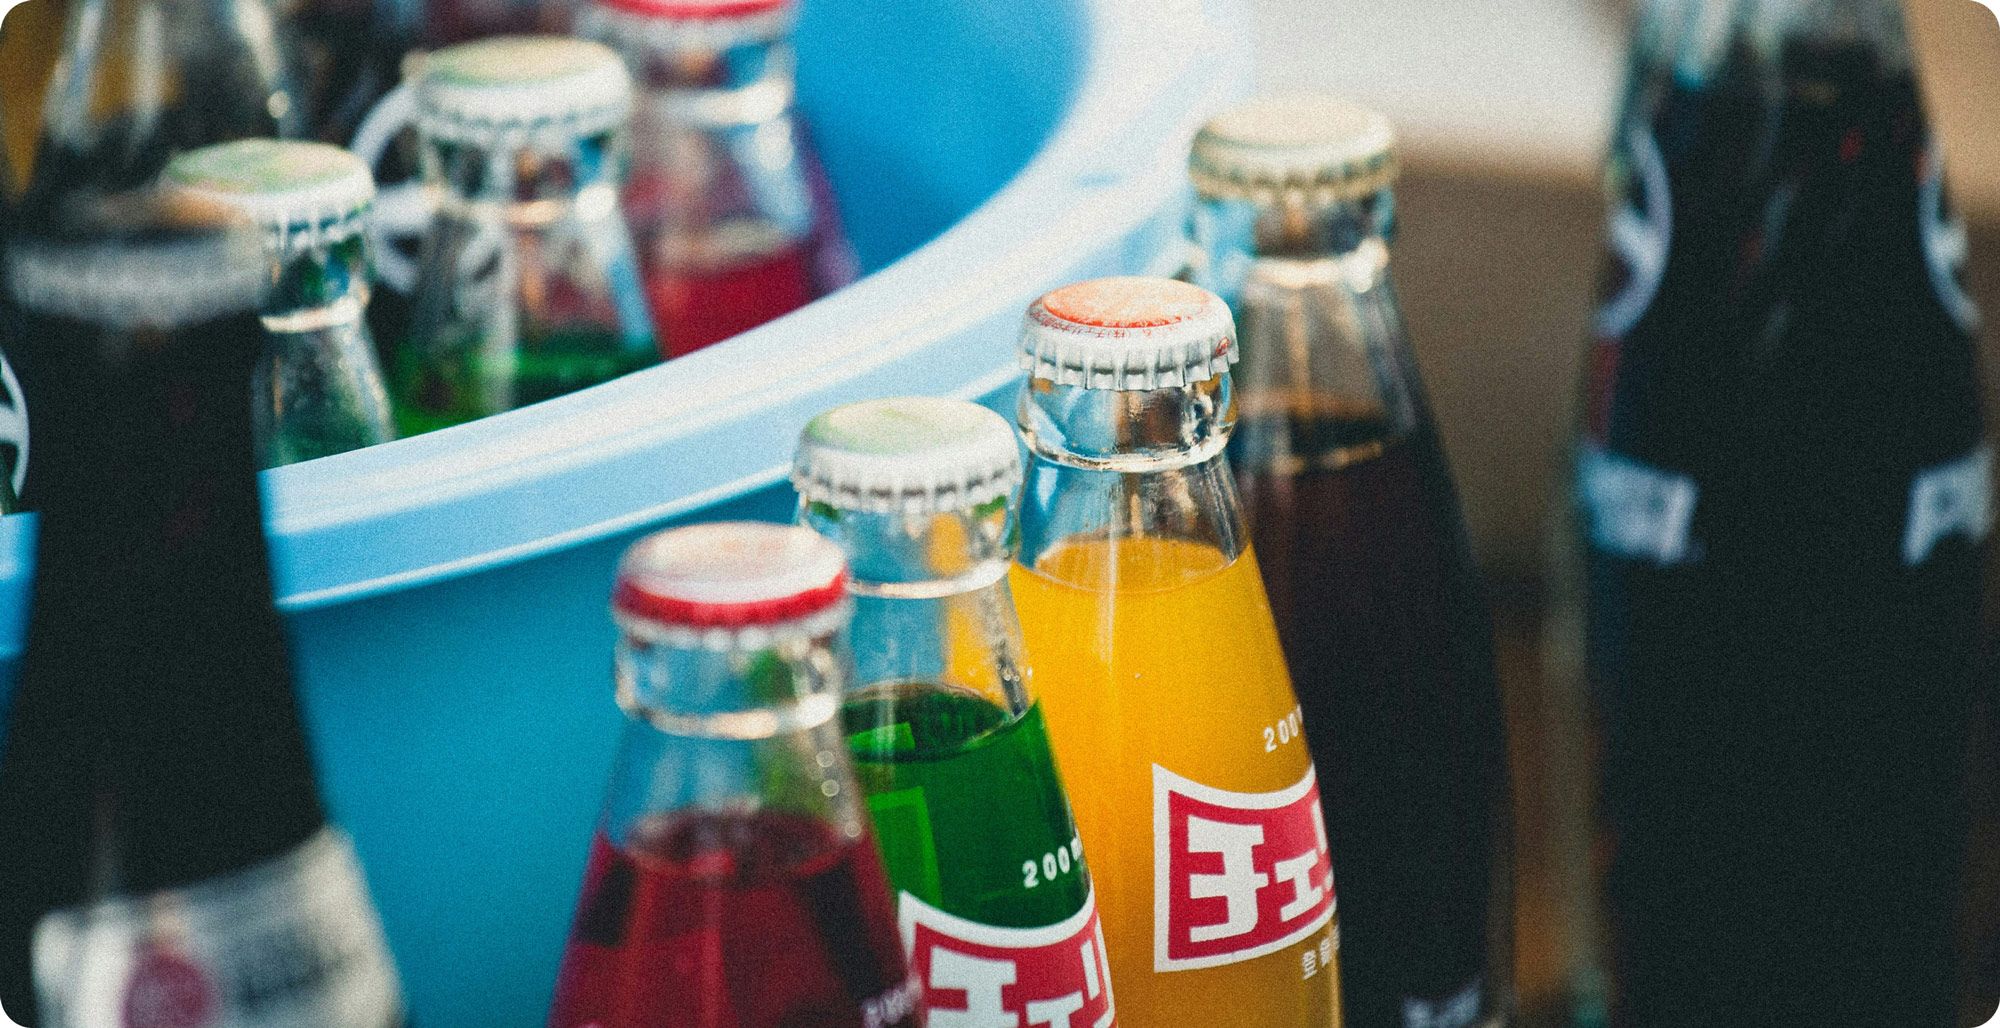 Image of bottled sodas: to illustrate substitute products/goods in cross price elasticity.